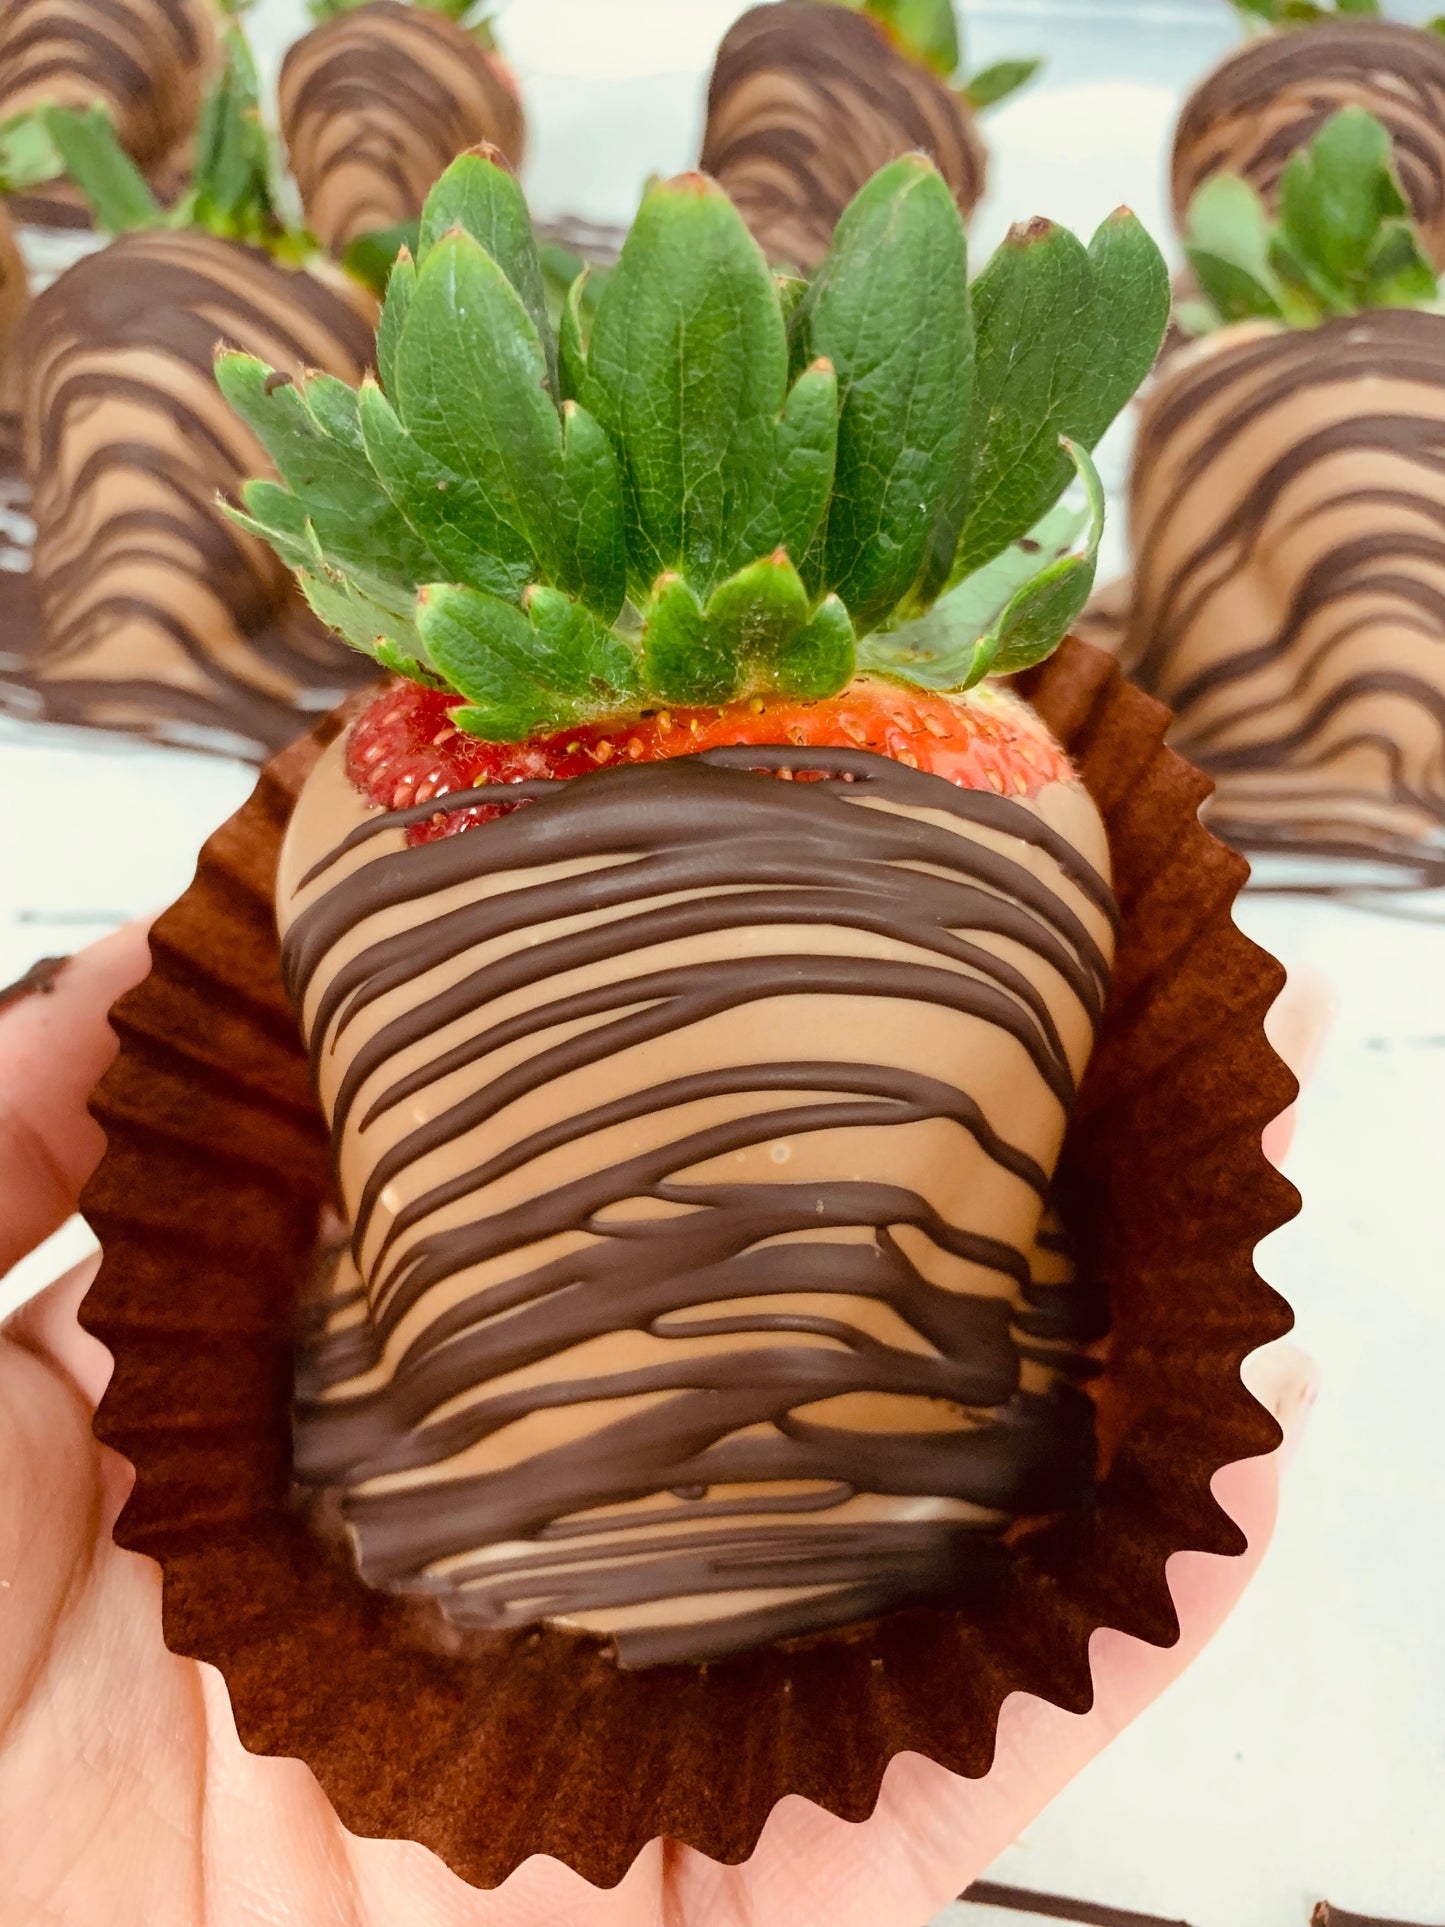 PREORDER - 12 Chocolate Covered Strawberries